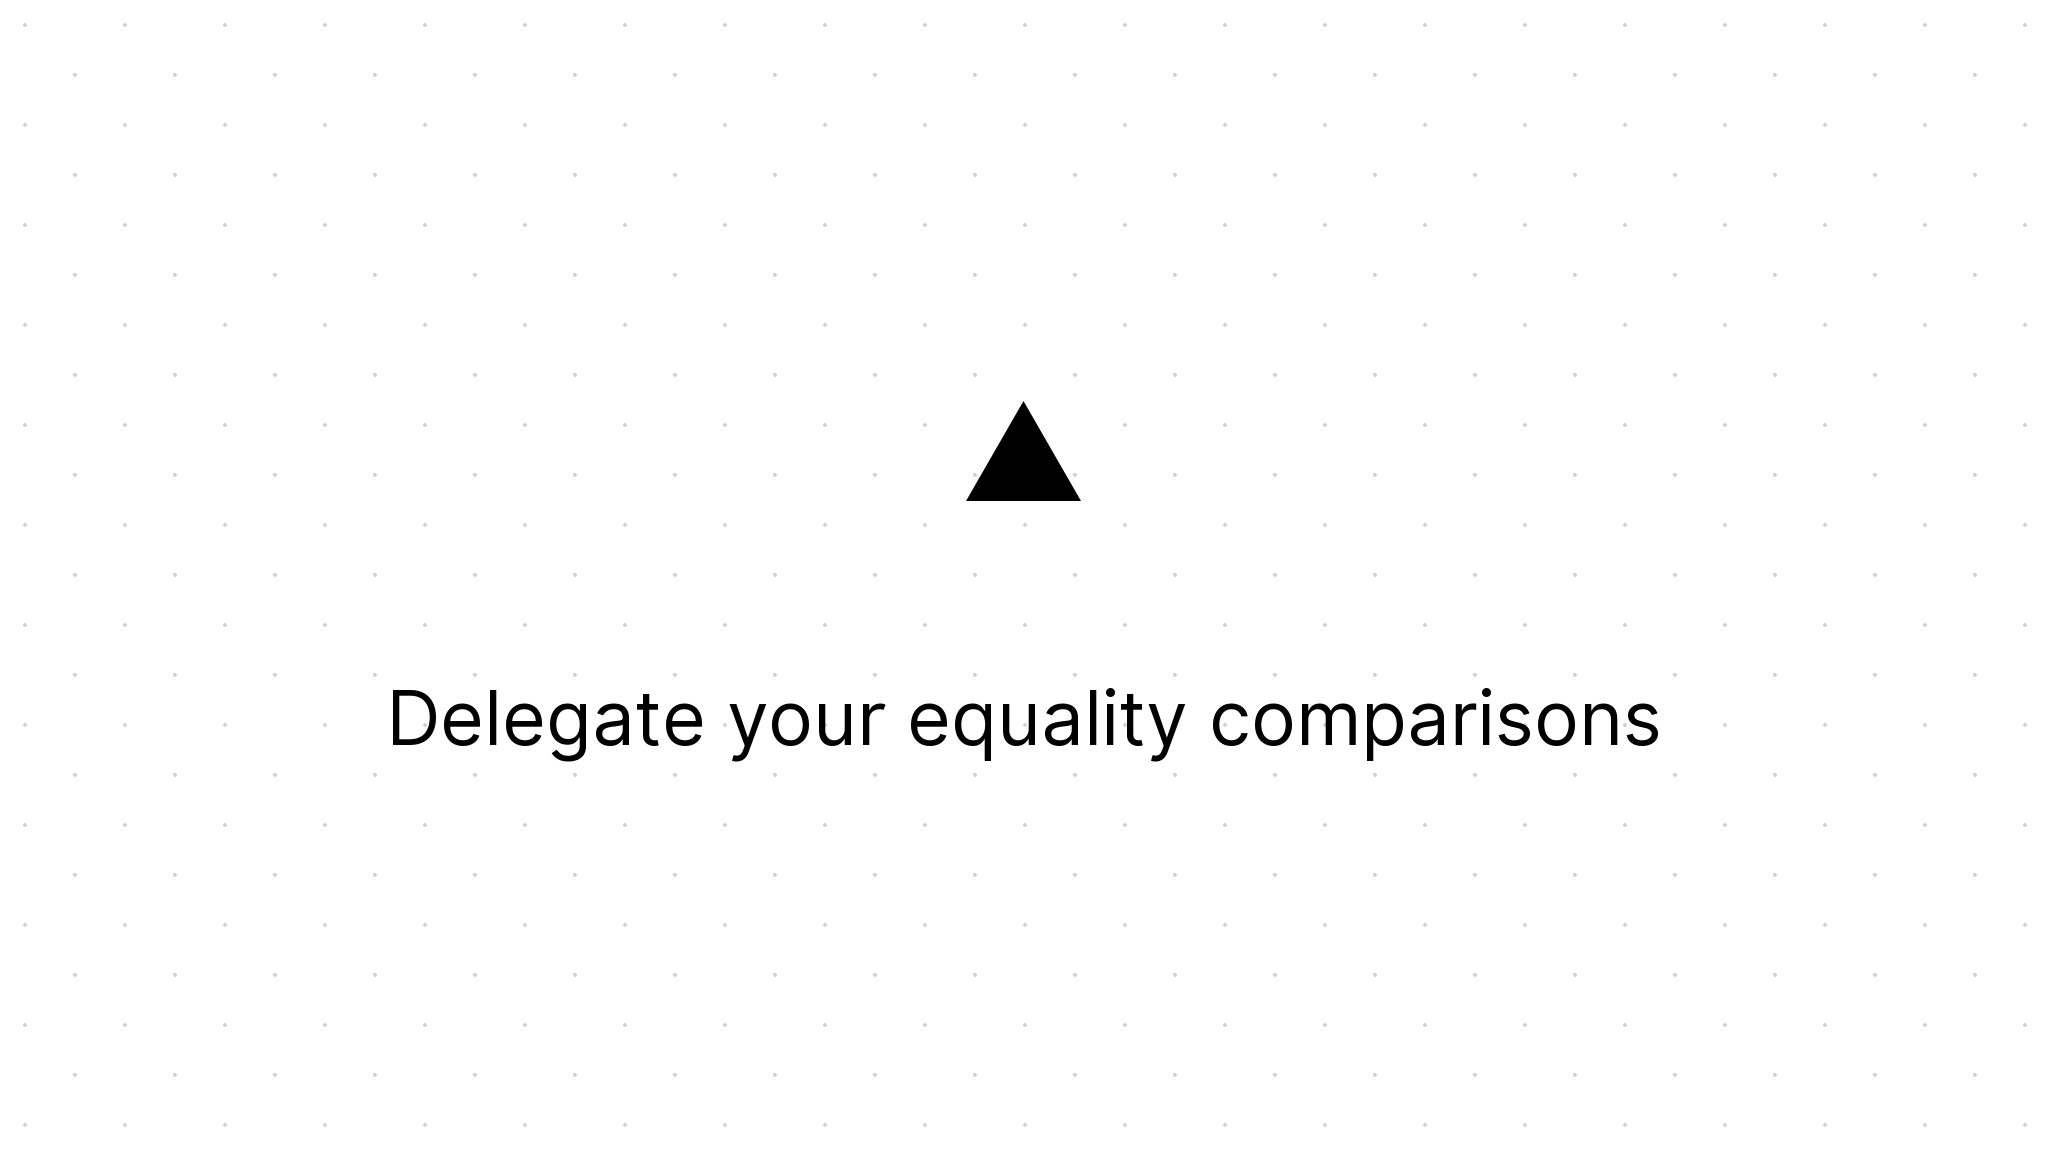 Cover Image for Delegate your equality comparisons